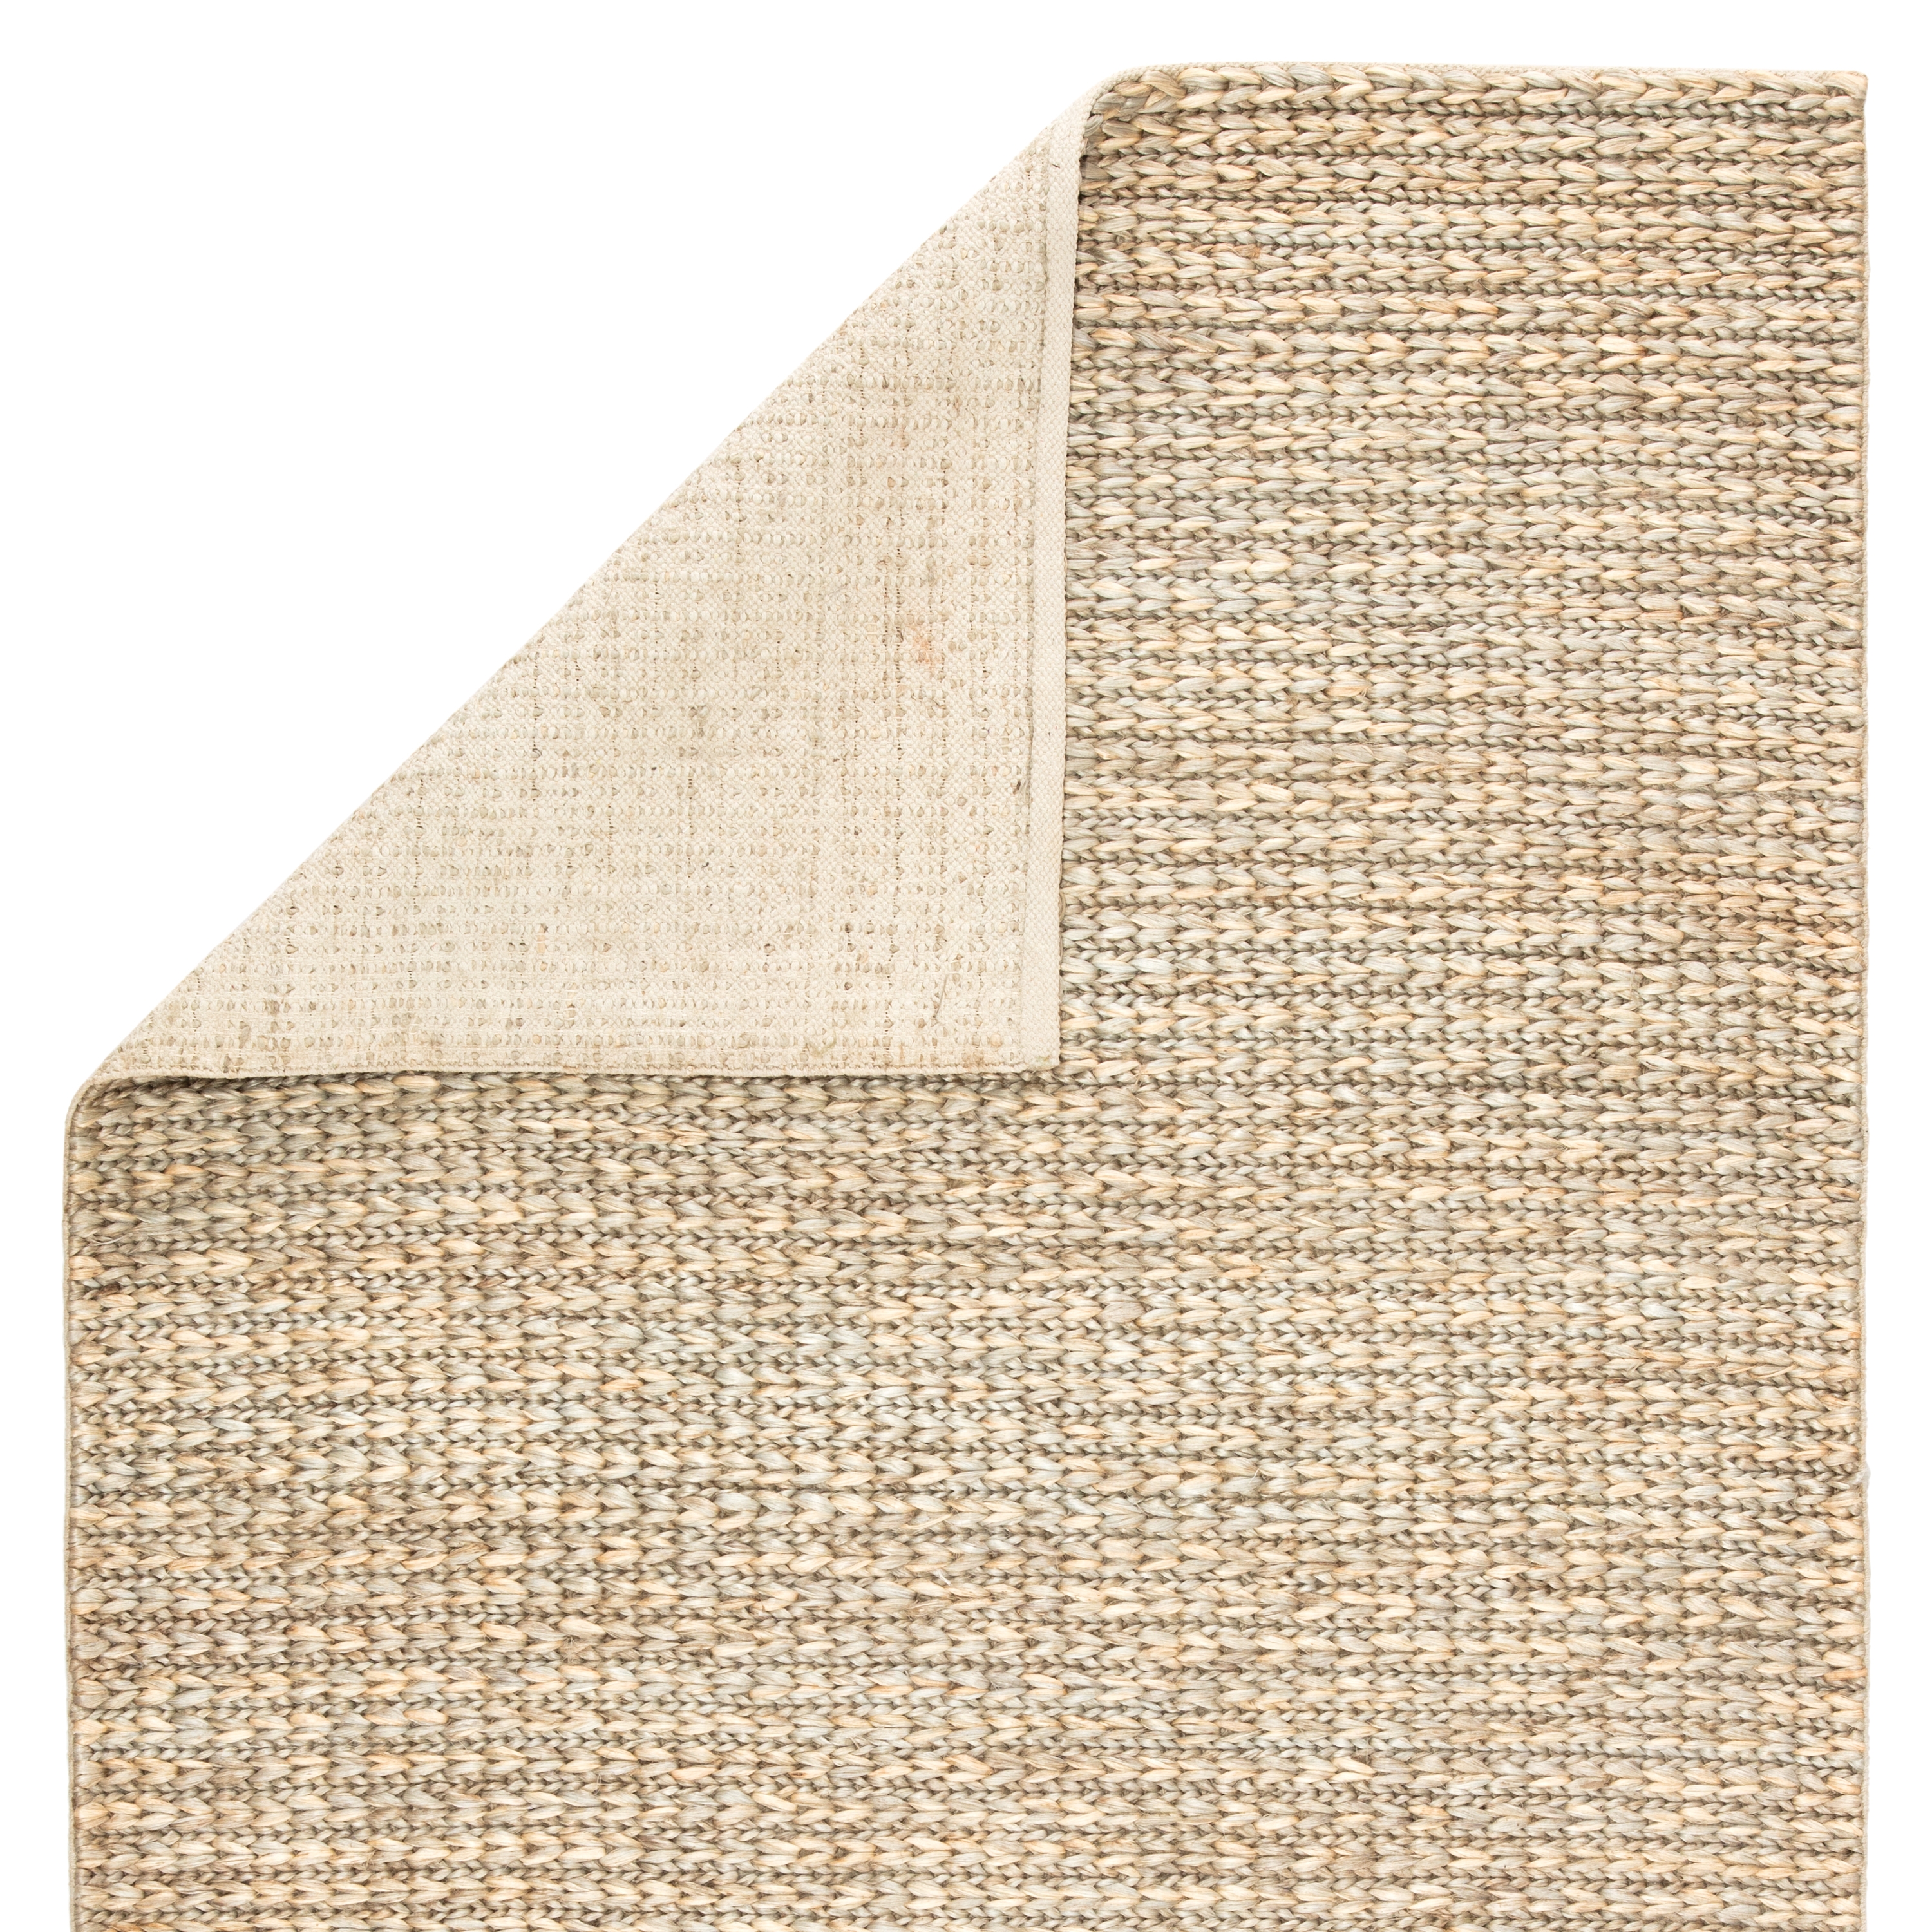 Calista Natural Solid Tan/ Greige Area Rug (9'X12') - Image 2